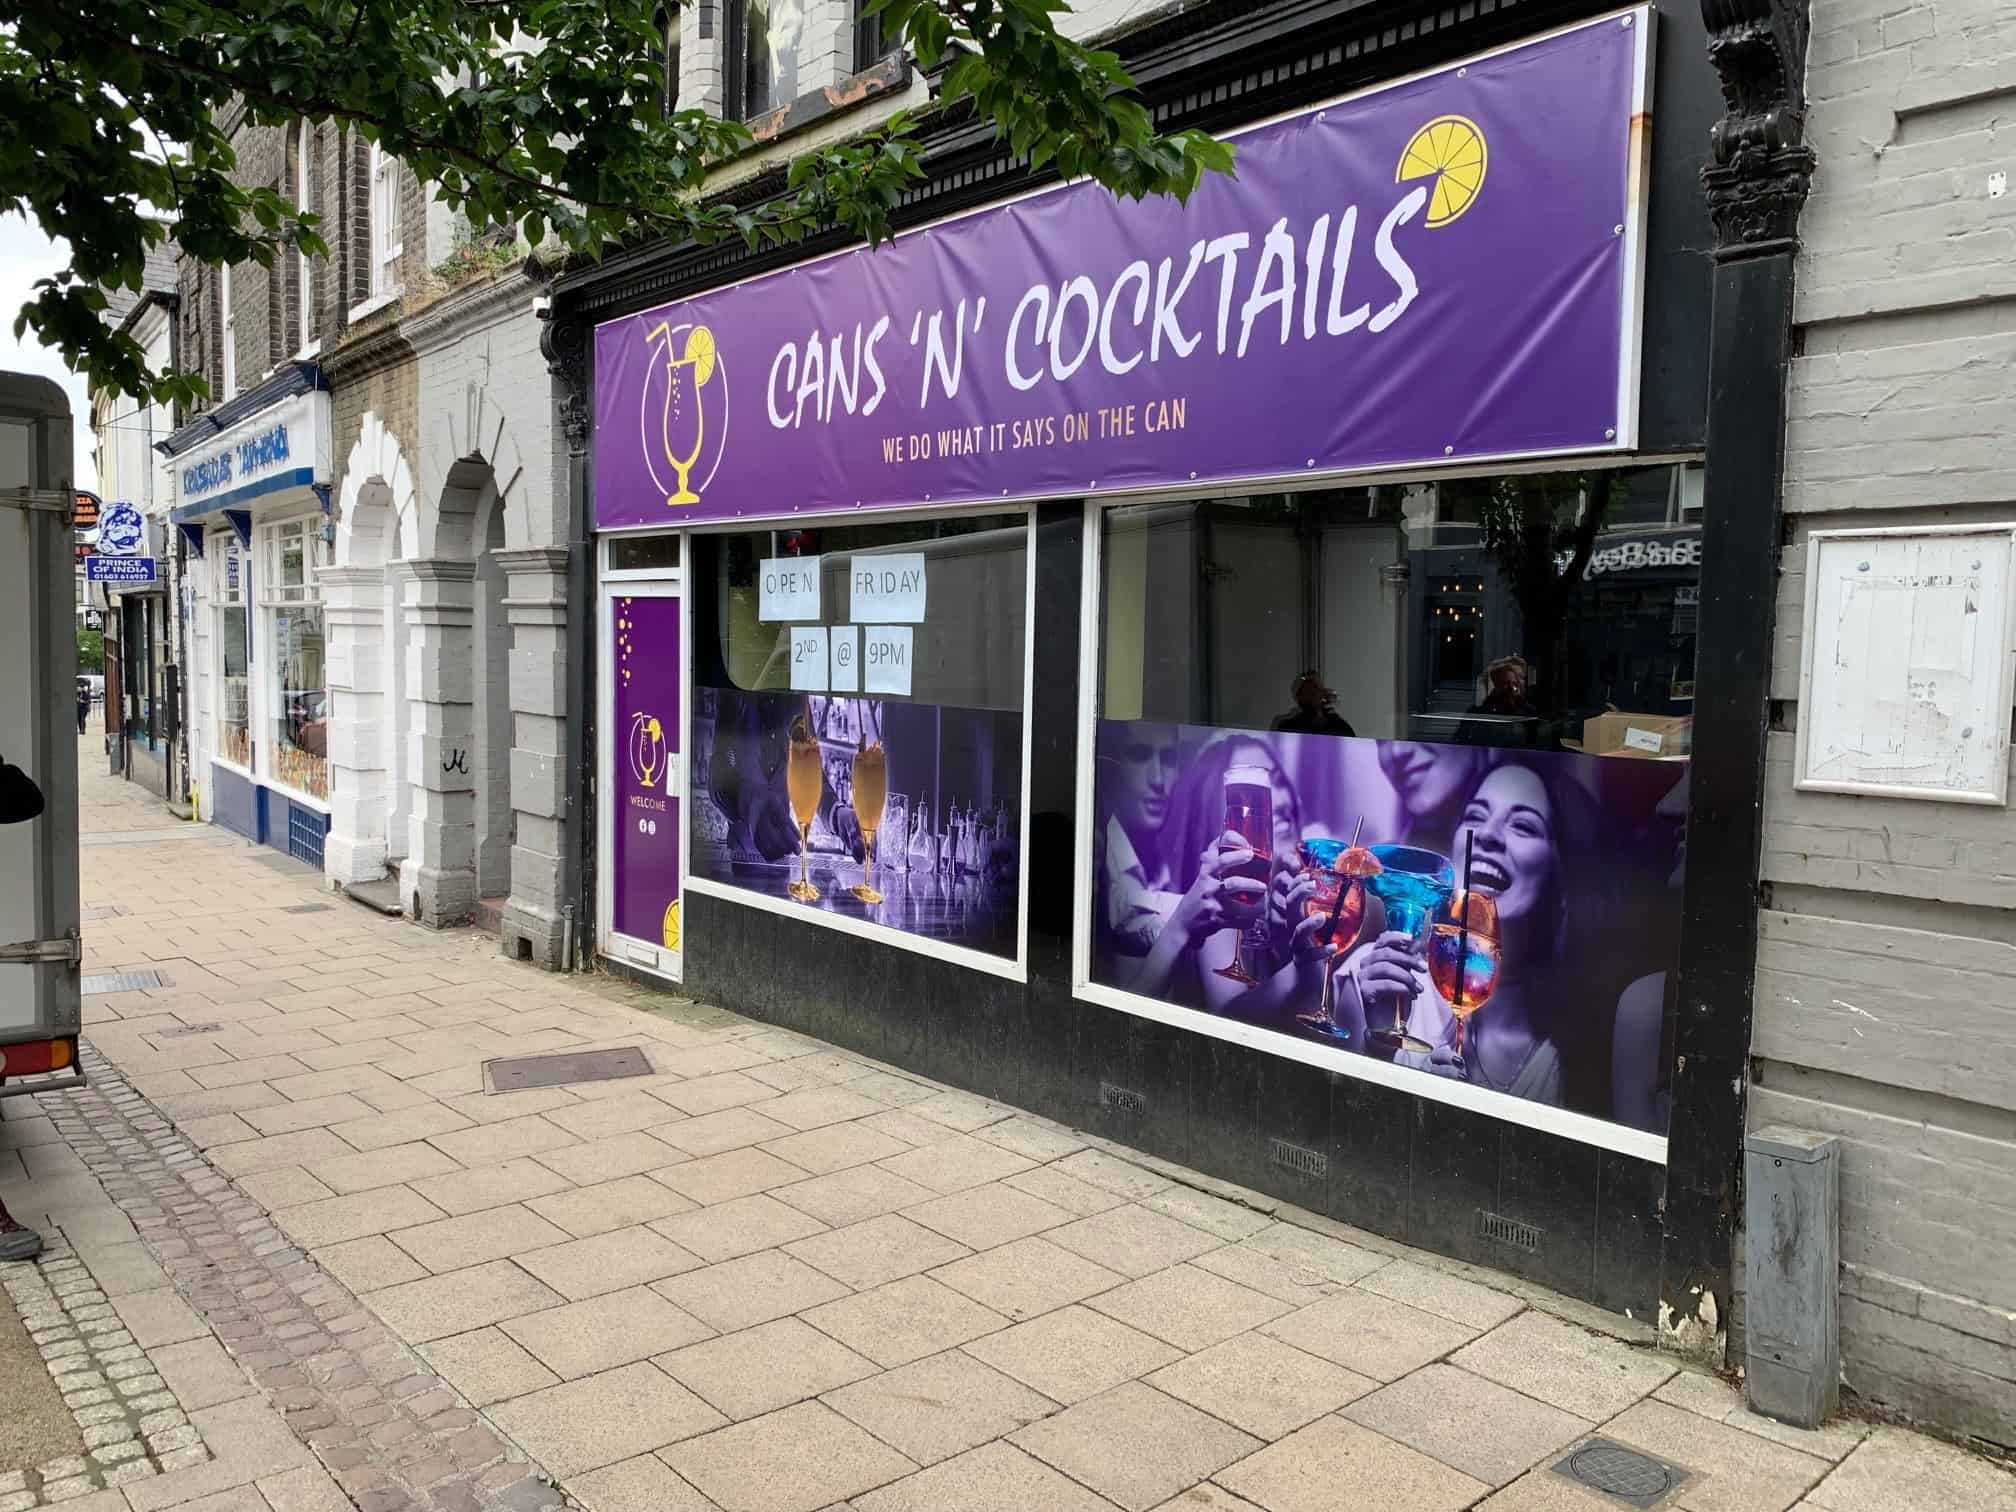 Nightclub owner urges partygoers to turn off NHS Covid app to stop ‘pingdemic’ ruining their fun